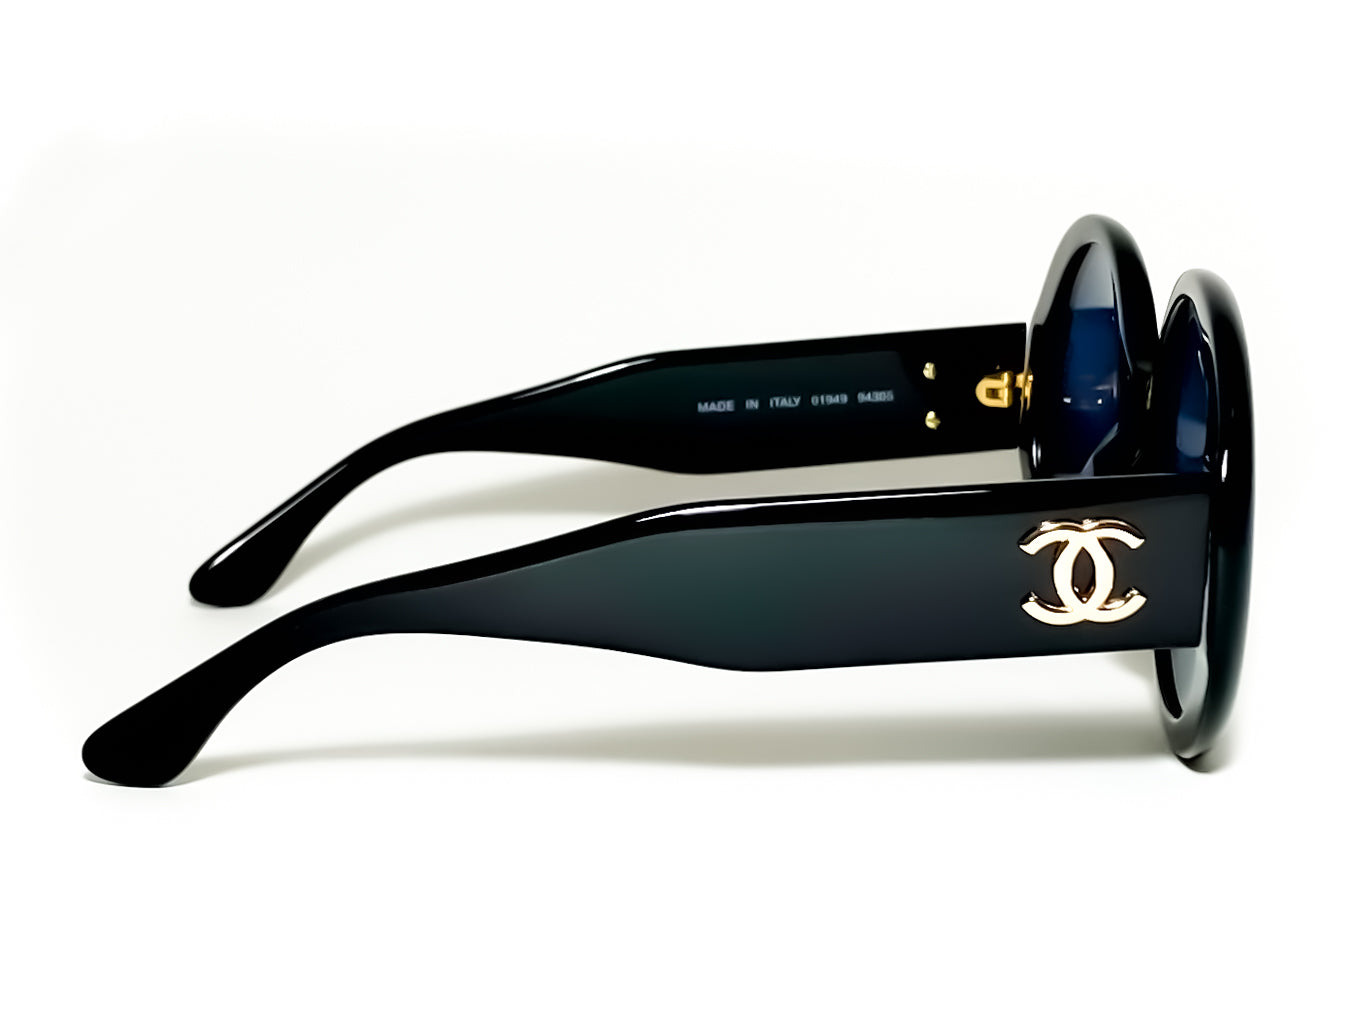 CHANEL black oversize with “CHANEL PARIS” on lenses - 1993